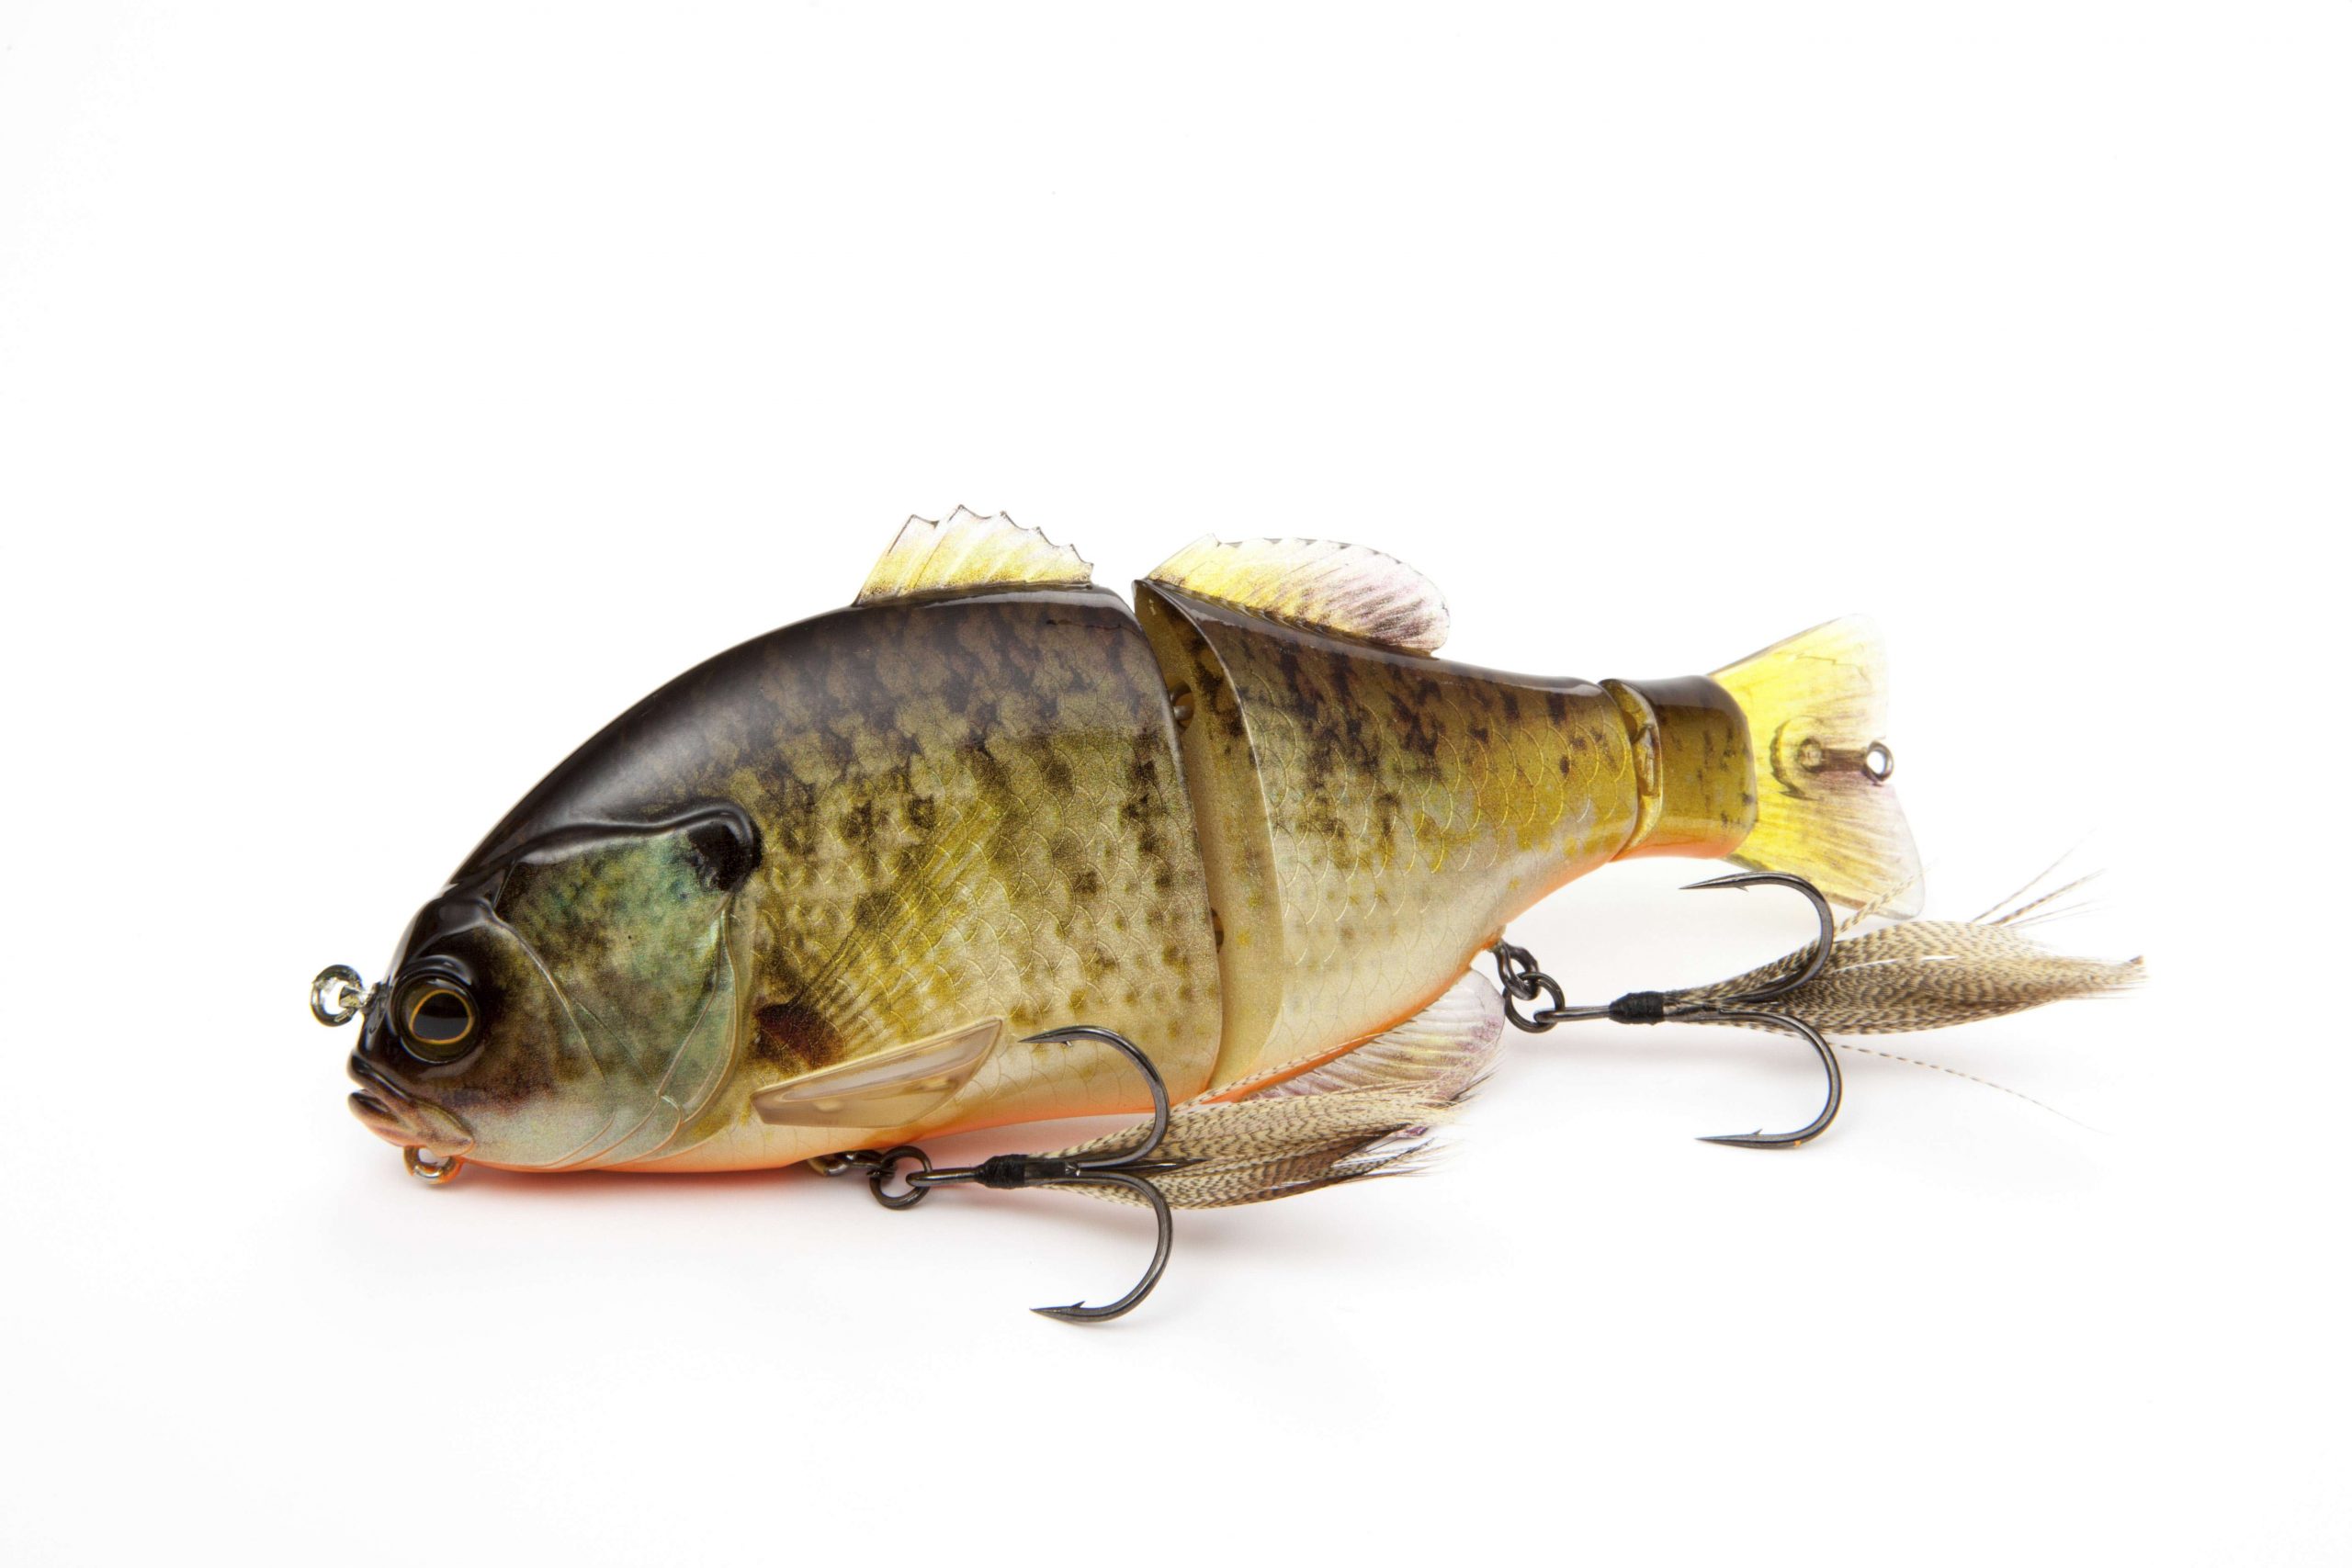 <B>JACKALL GANTAREL HARD SWIMBAIT</b>
With a 6-inch, triple-jointed body mimicking a nice-size lunch for bass, the Gantarel swimbait should be a hit with North American anglers. An interesting part of the design is the pectoral fin, which helps the bait dive down to 3 feet. Stop the retrieve, and the bait slowly floats back to the surface. The bait will retail for $39.99.